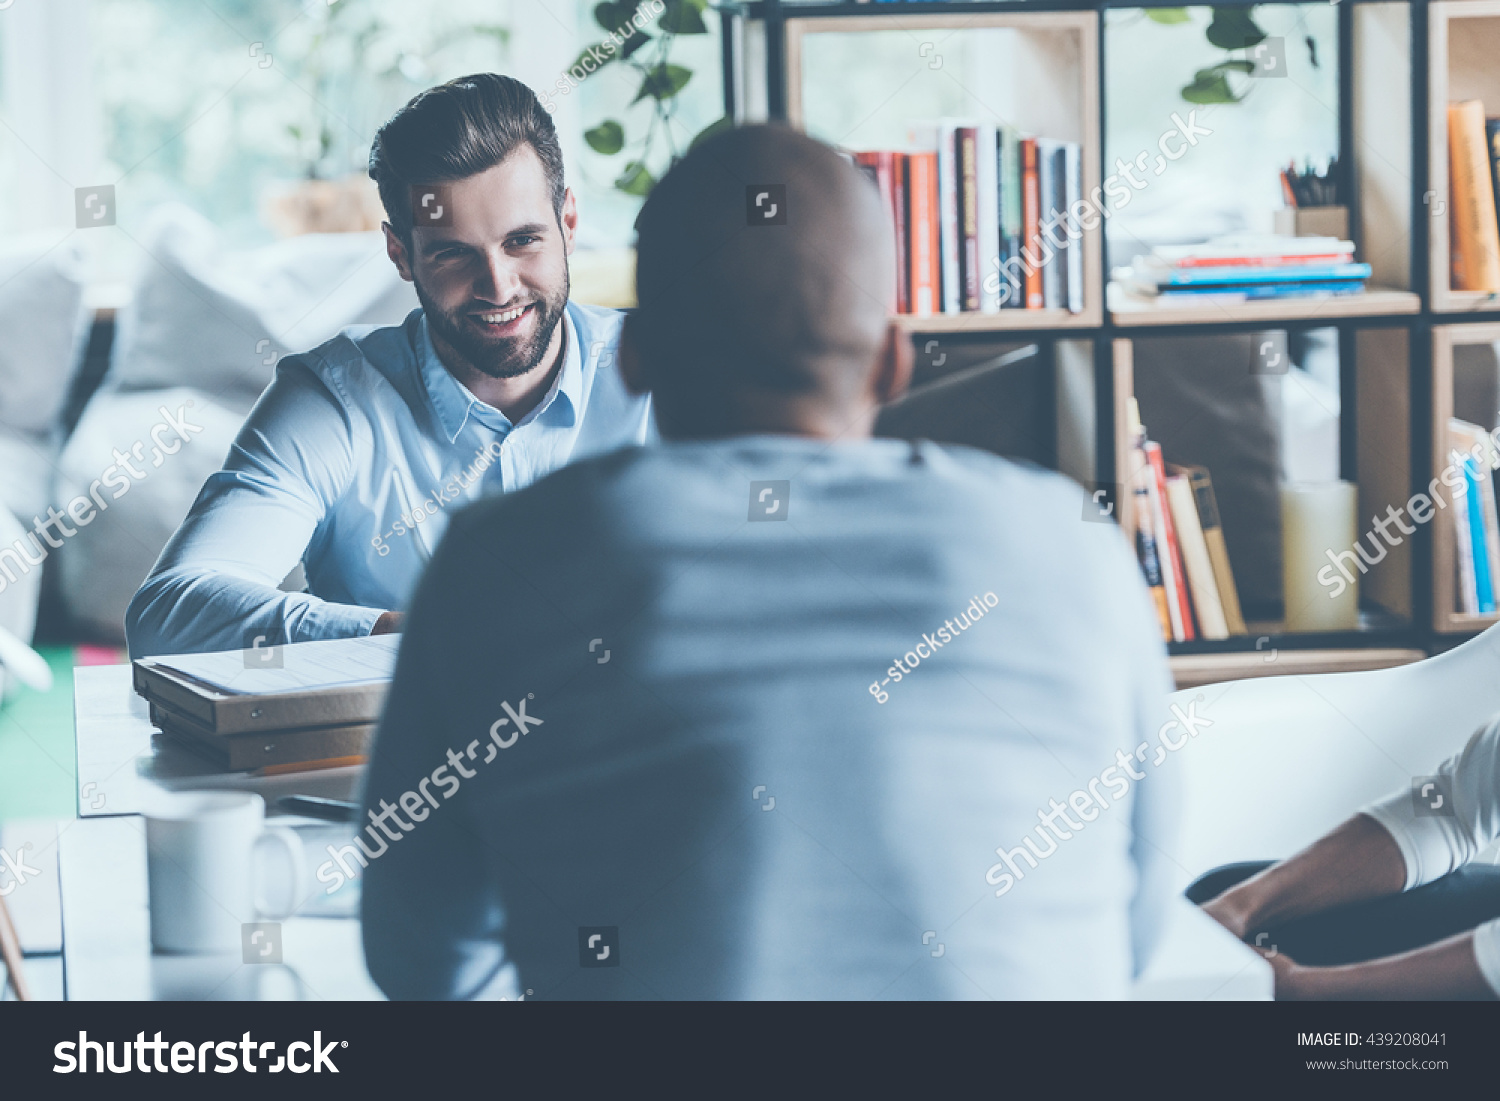 Job interview. Two young men in smart casual wear sitting at the office desk together while one of them smiling  #439208041